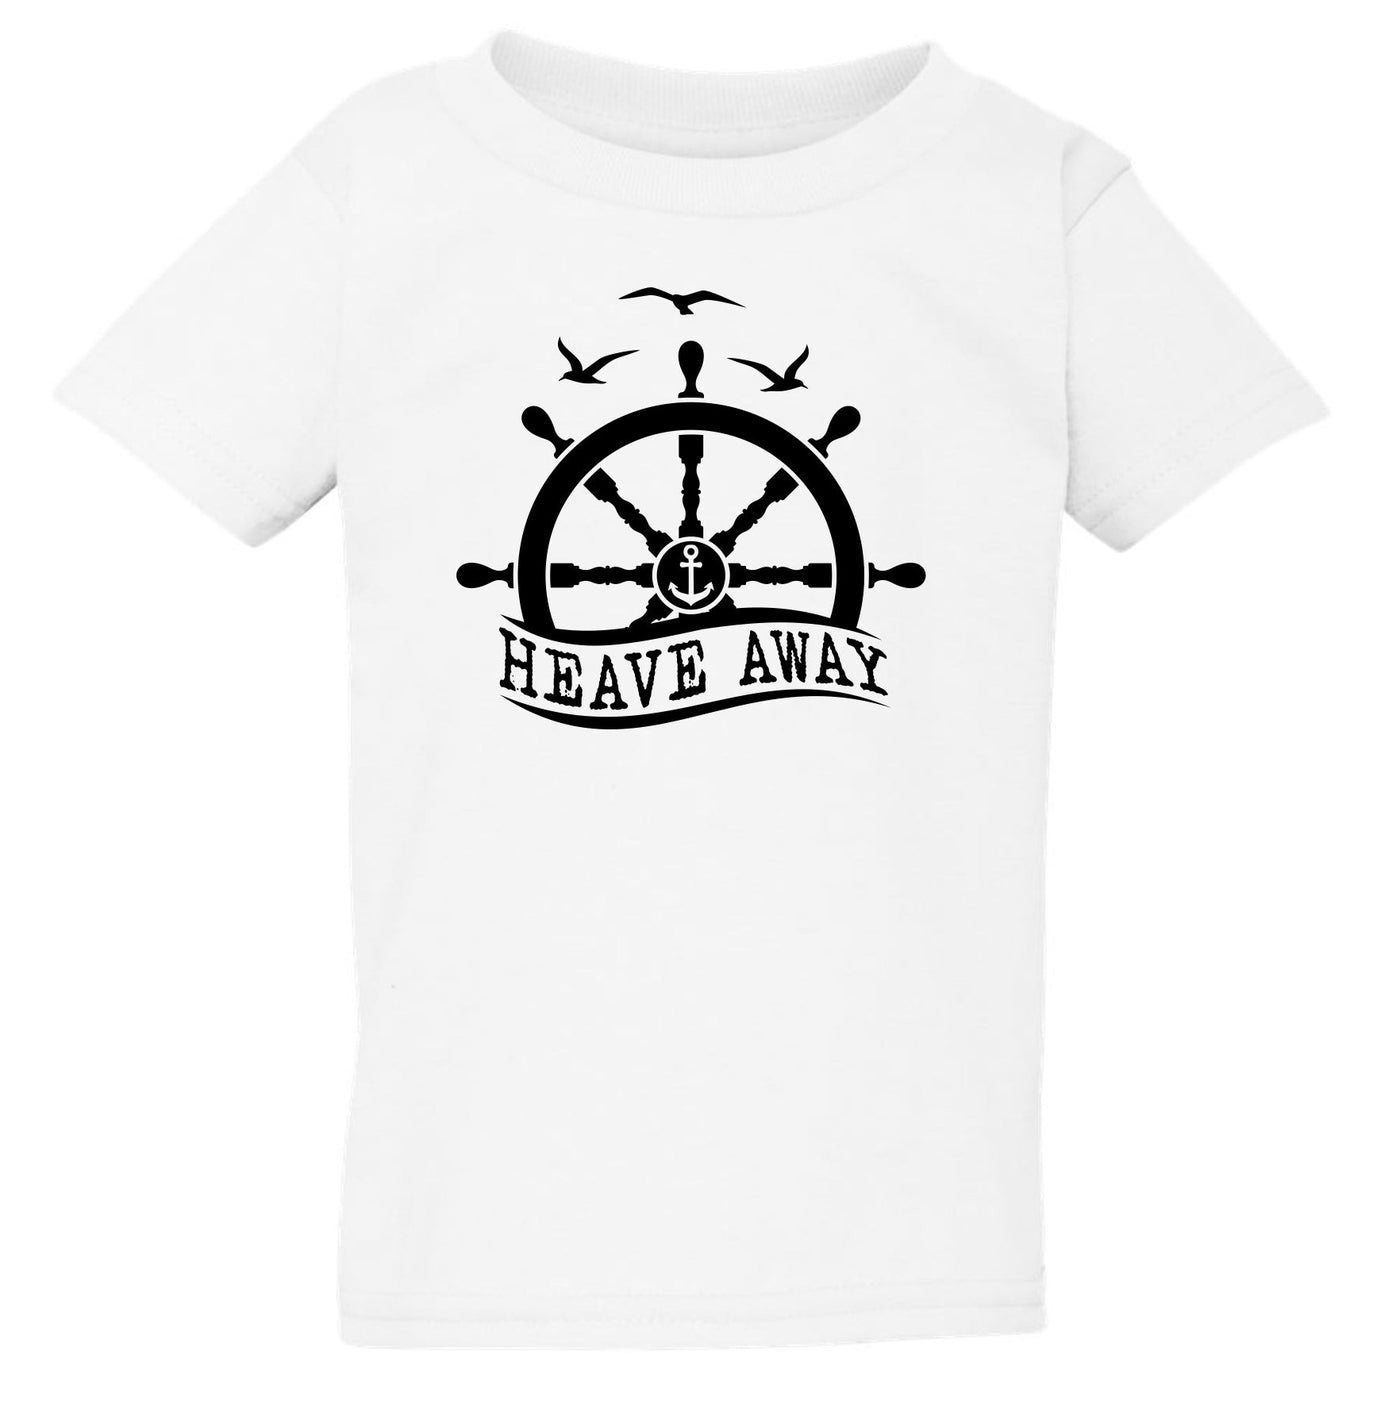 "Heave Away" Toddler/Youth T-Shirt